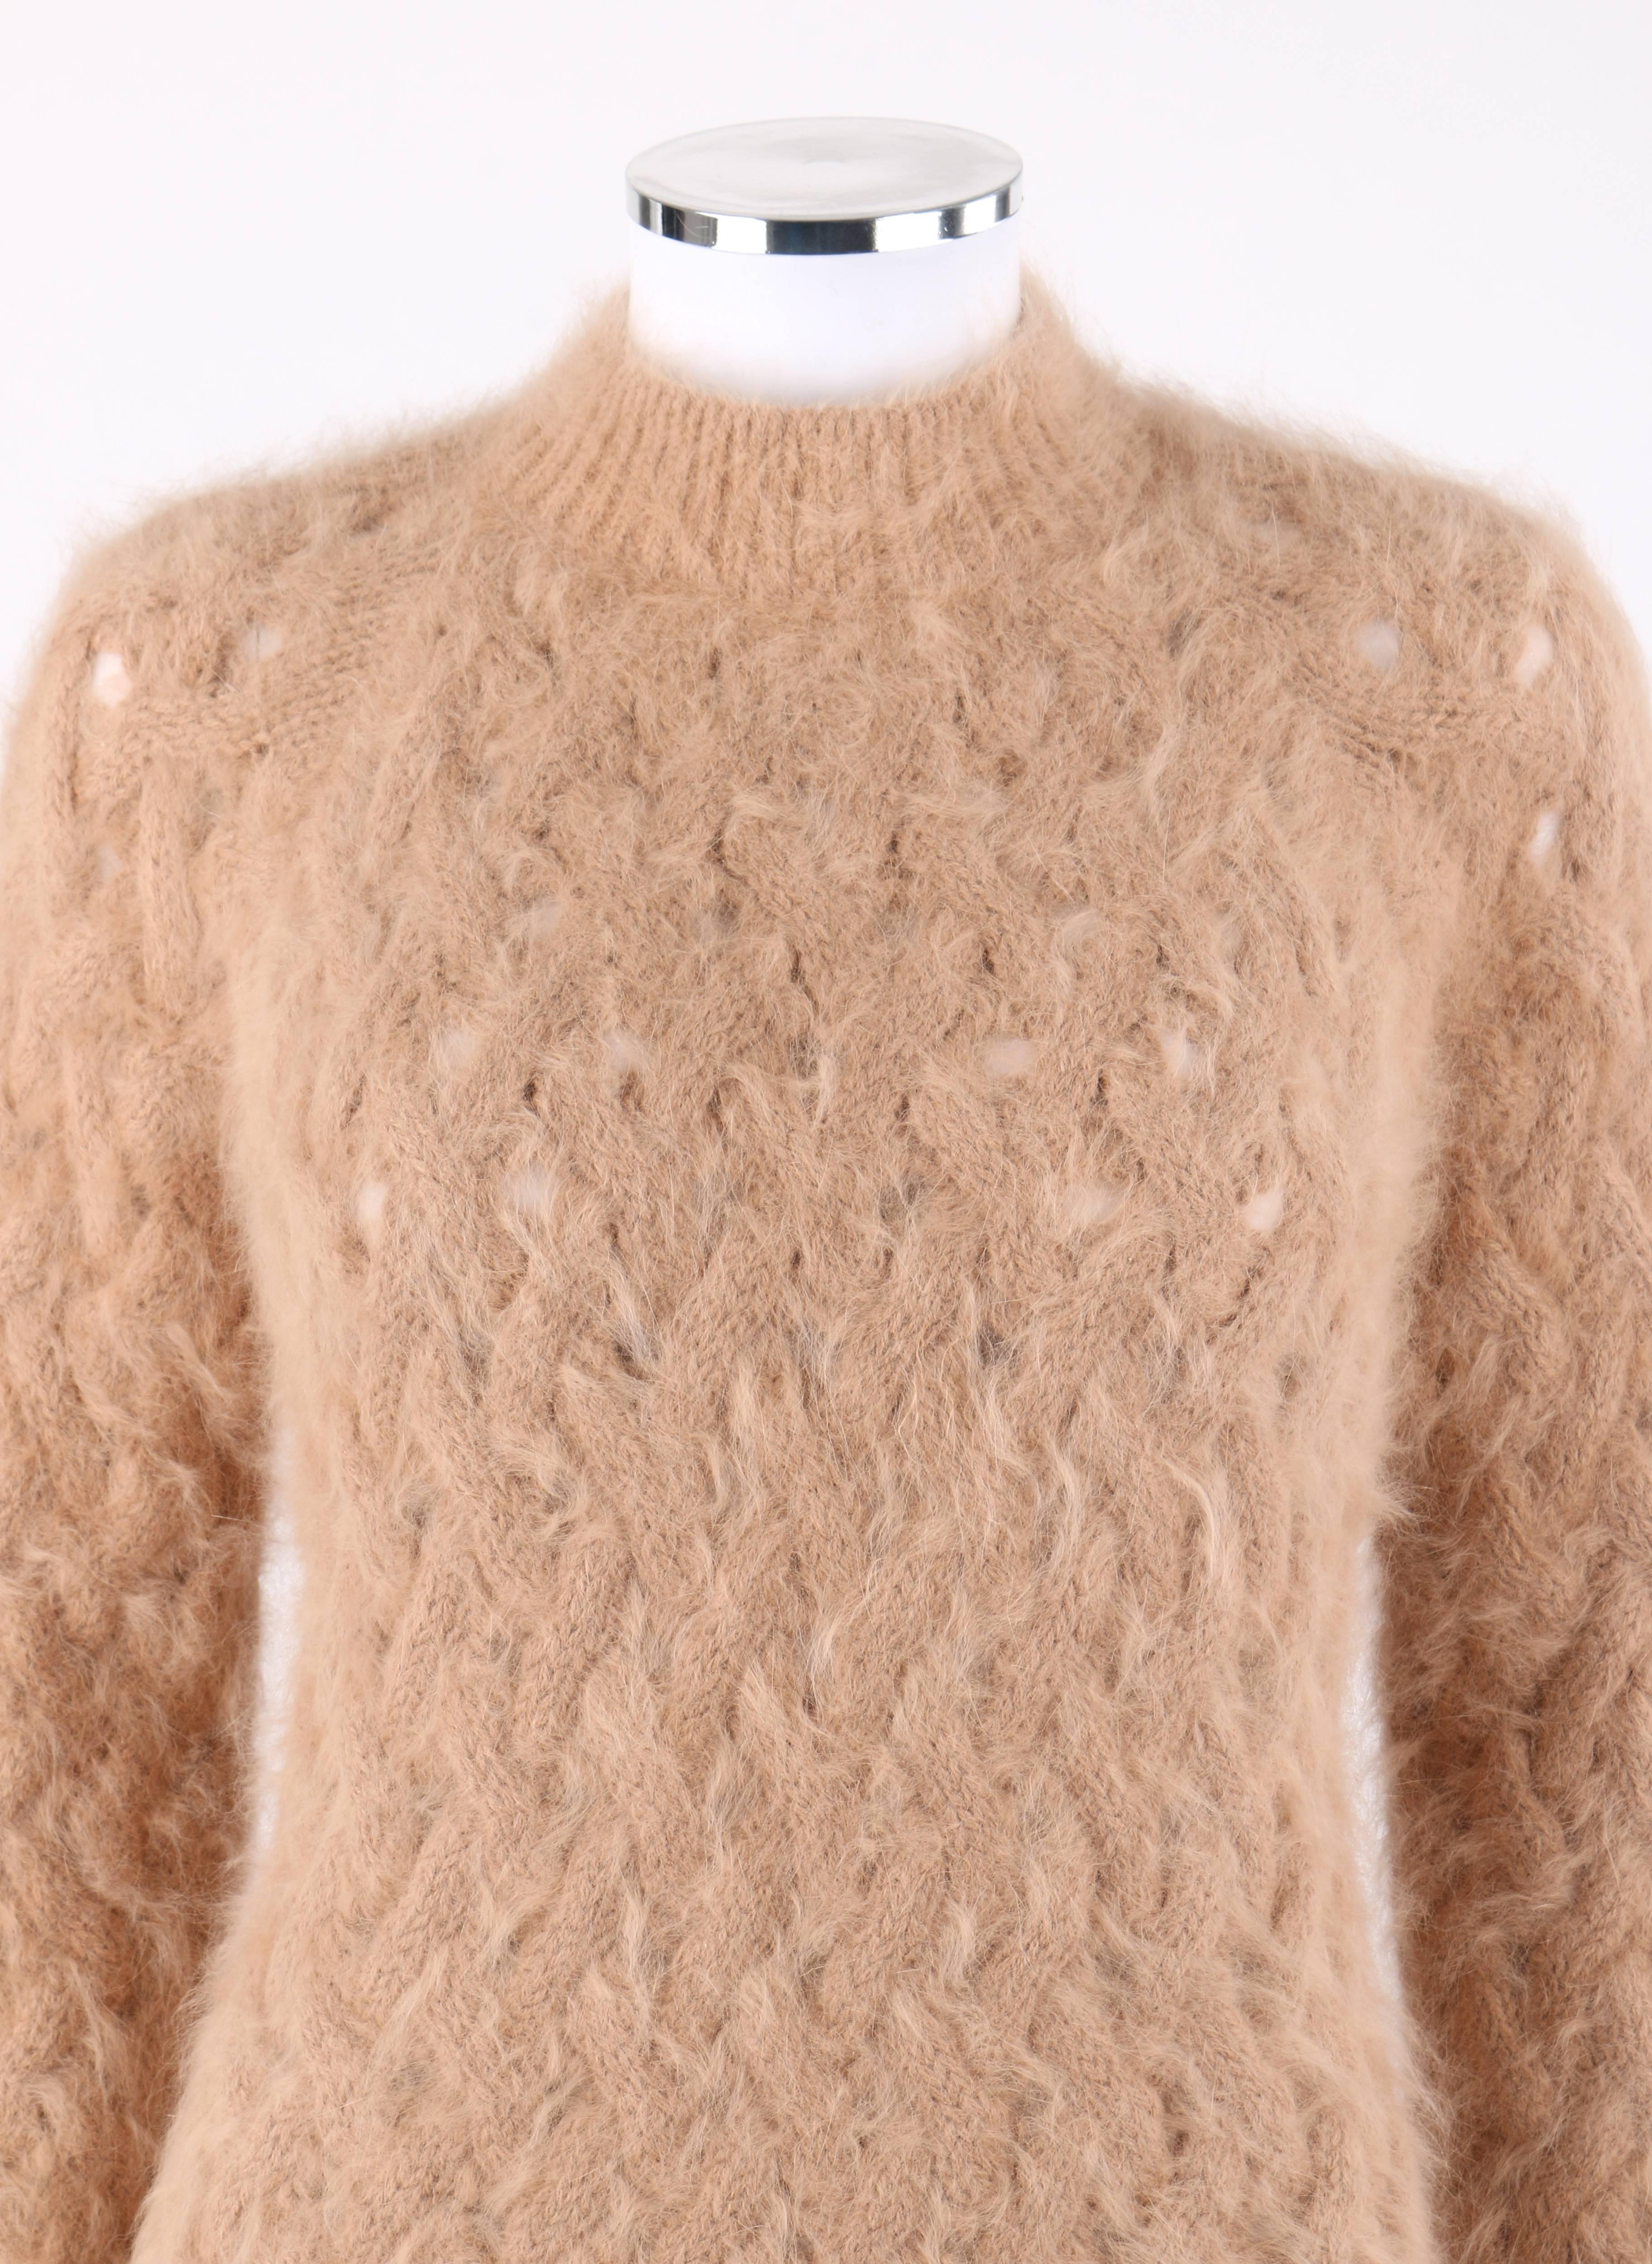 Balmain Paris Tan angora wool chunk cable knit pull over mock neck sweater. Angora wool blend chunky open cable knit. Long raglan sleeves. Mock neckline. Rib knit detail at neckline, cuffs, and hem. Pull over style. Marked Fabric Content: 